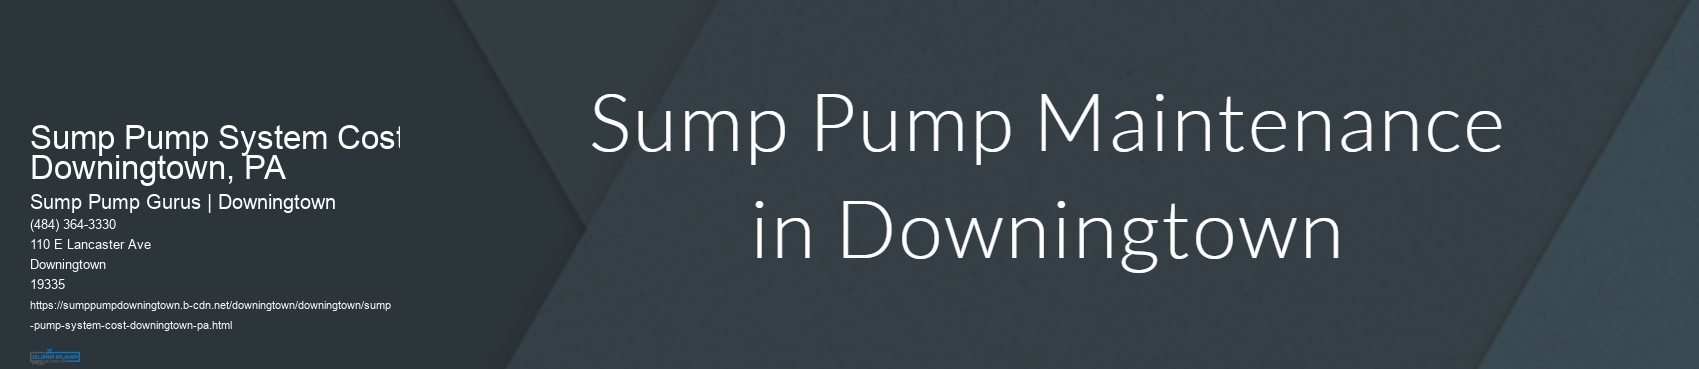 Sump Pump System Cost Downingtown, PA